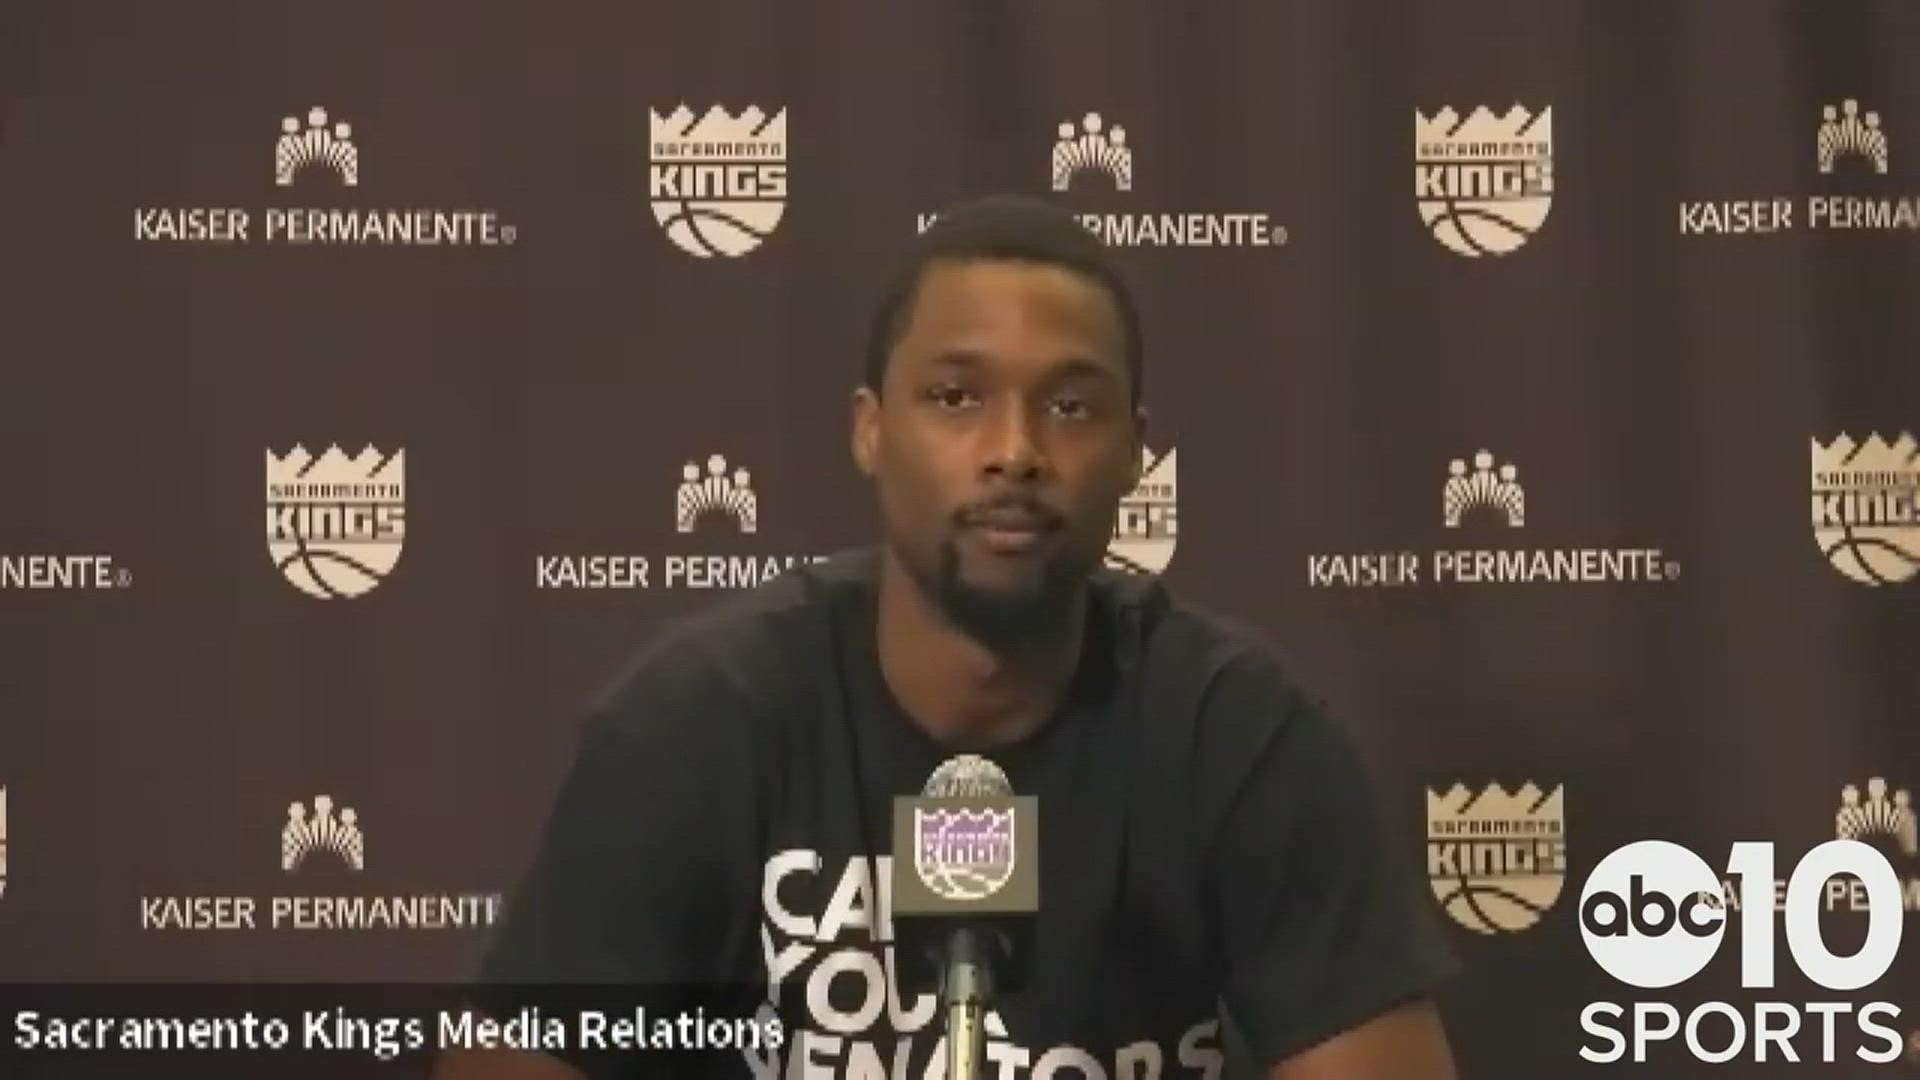 Following a 31-41 season, Kings veteran Harrison Barnes reflects on the challenges of the past season, improvements needed & being rewarded for his community efforts